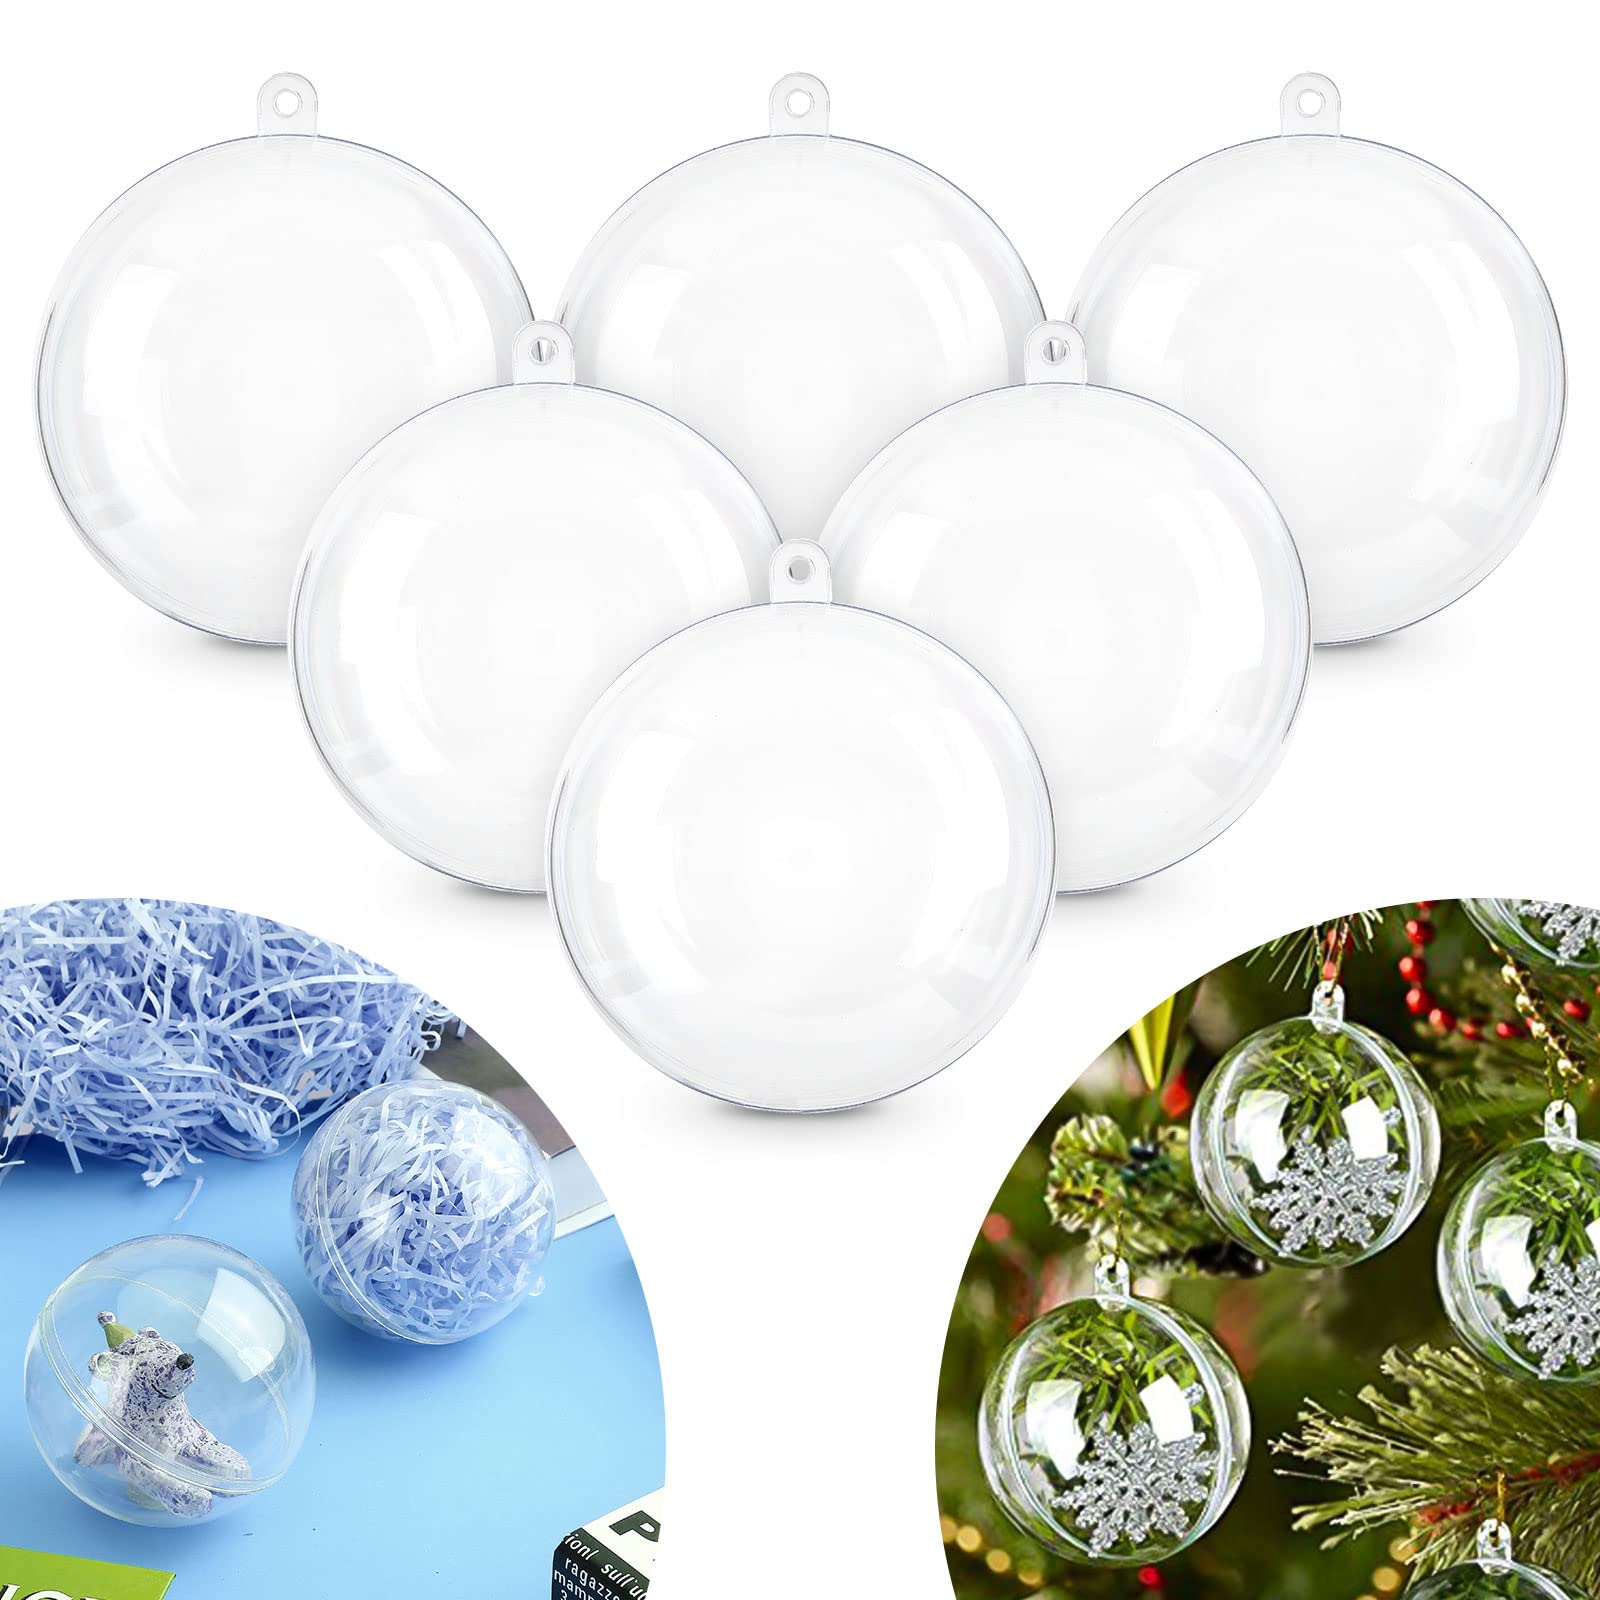 20pcs 3.14''/80mm Christmas Balls Clear Plastic Fillable Baubles Ball for Christmas Tree Ornaments Hanging Pendants Wedding Party Christmas Decorations Navidad.